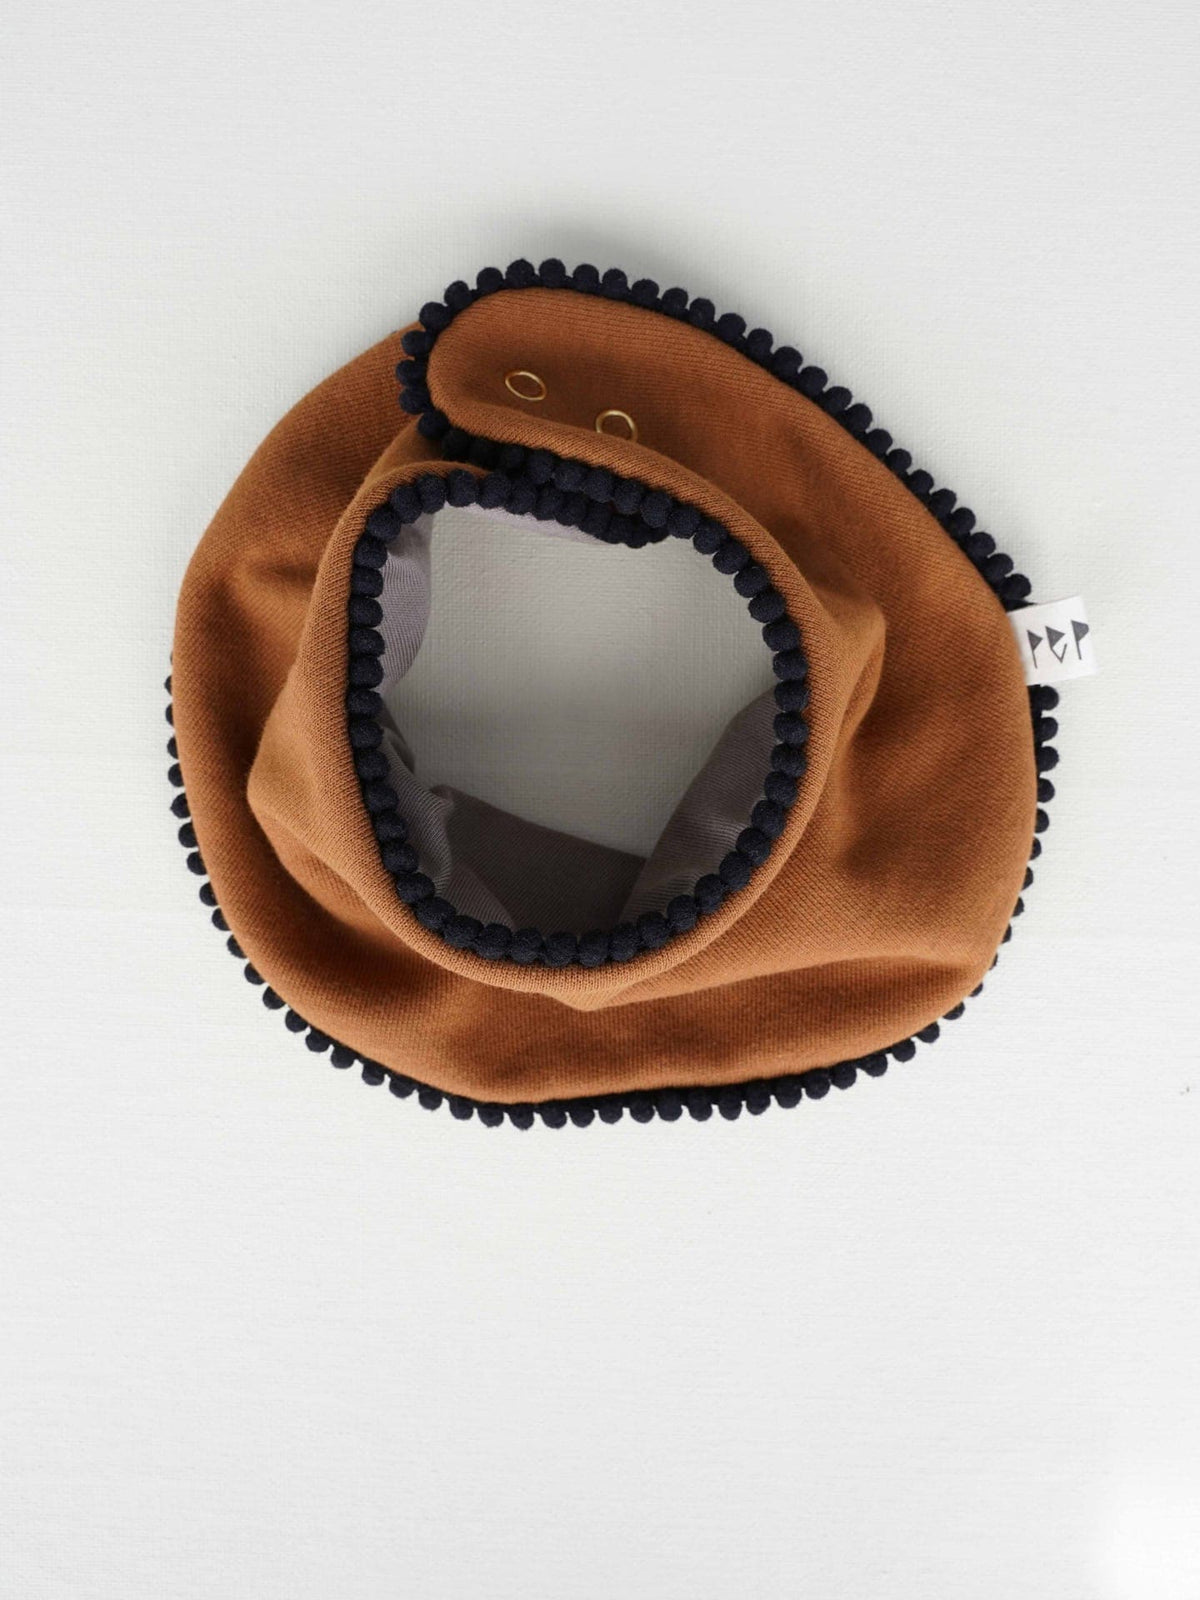 A Baby Gift Box – Copper cowboy hat with a black pom pom by Peppin.